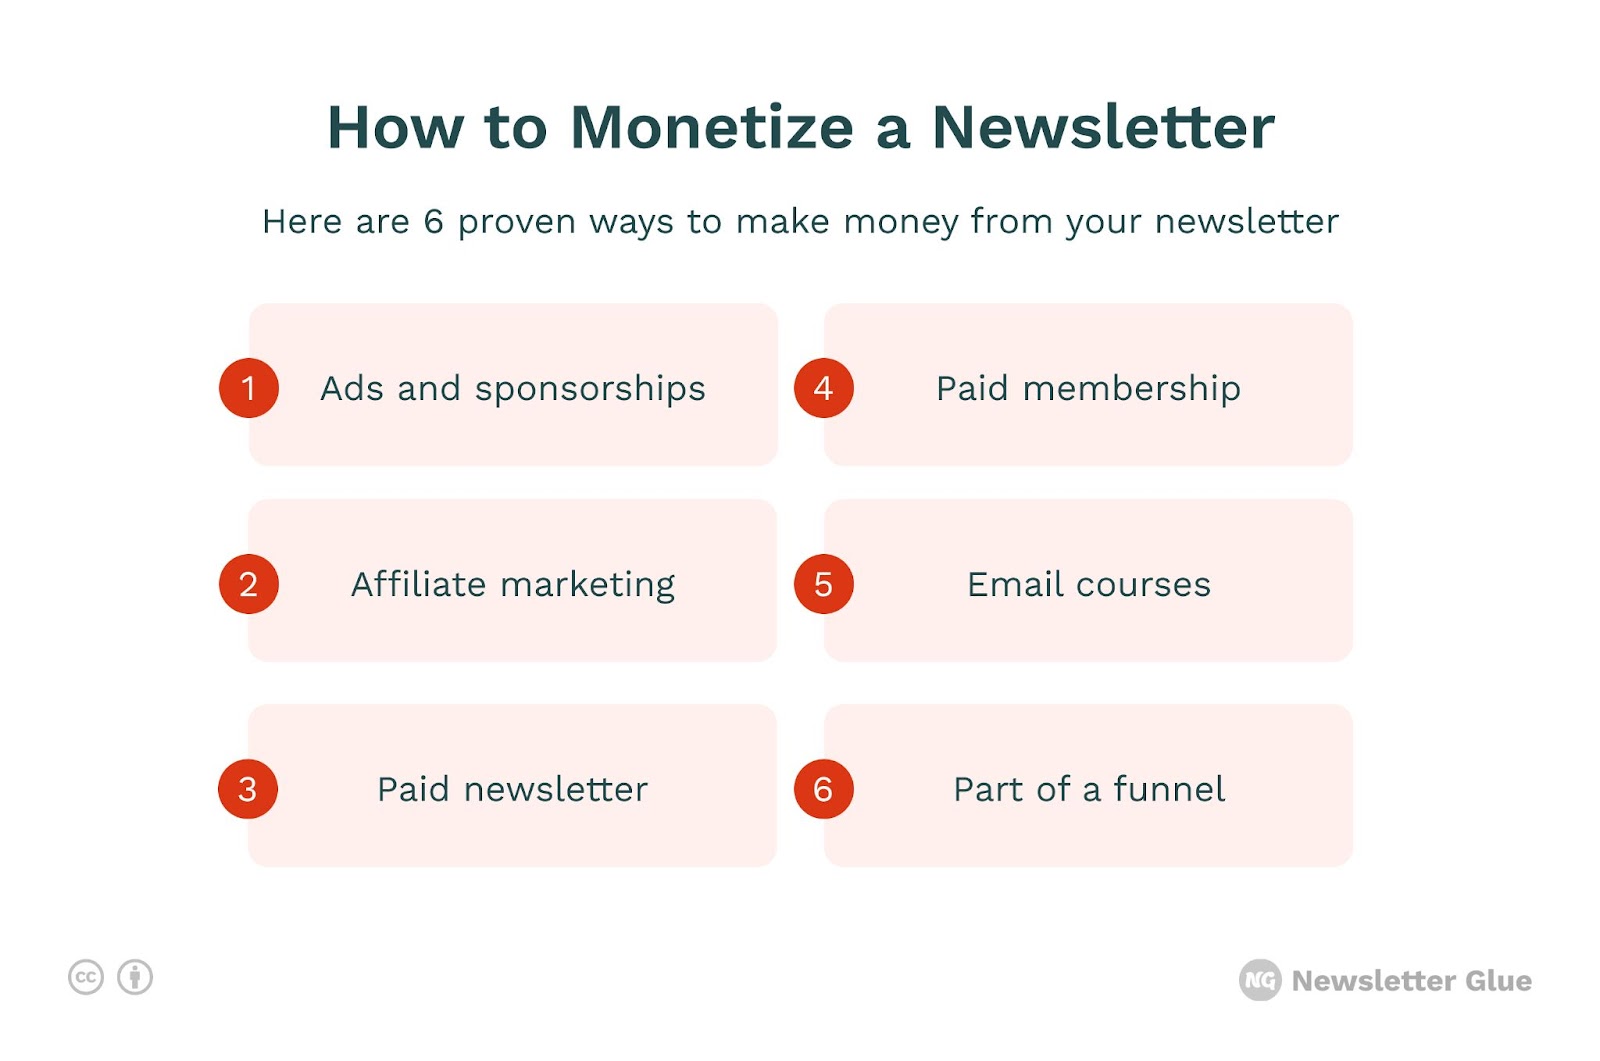 How to Monetize a Newsletter. Here are 6 proven ways to make money from your newsletter: ads and sponsorships, affiliate marketing, paid newsletters, paid membership, email courses, and as part of a funnel. 